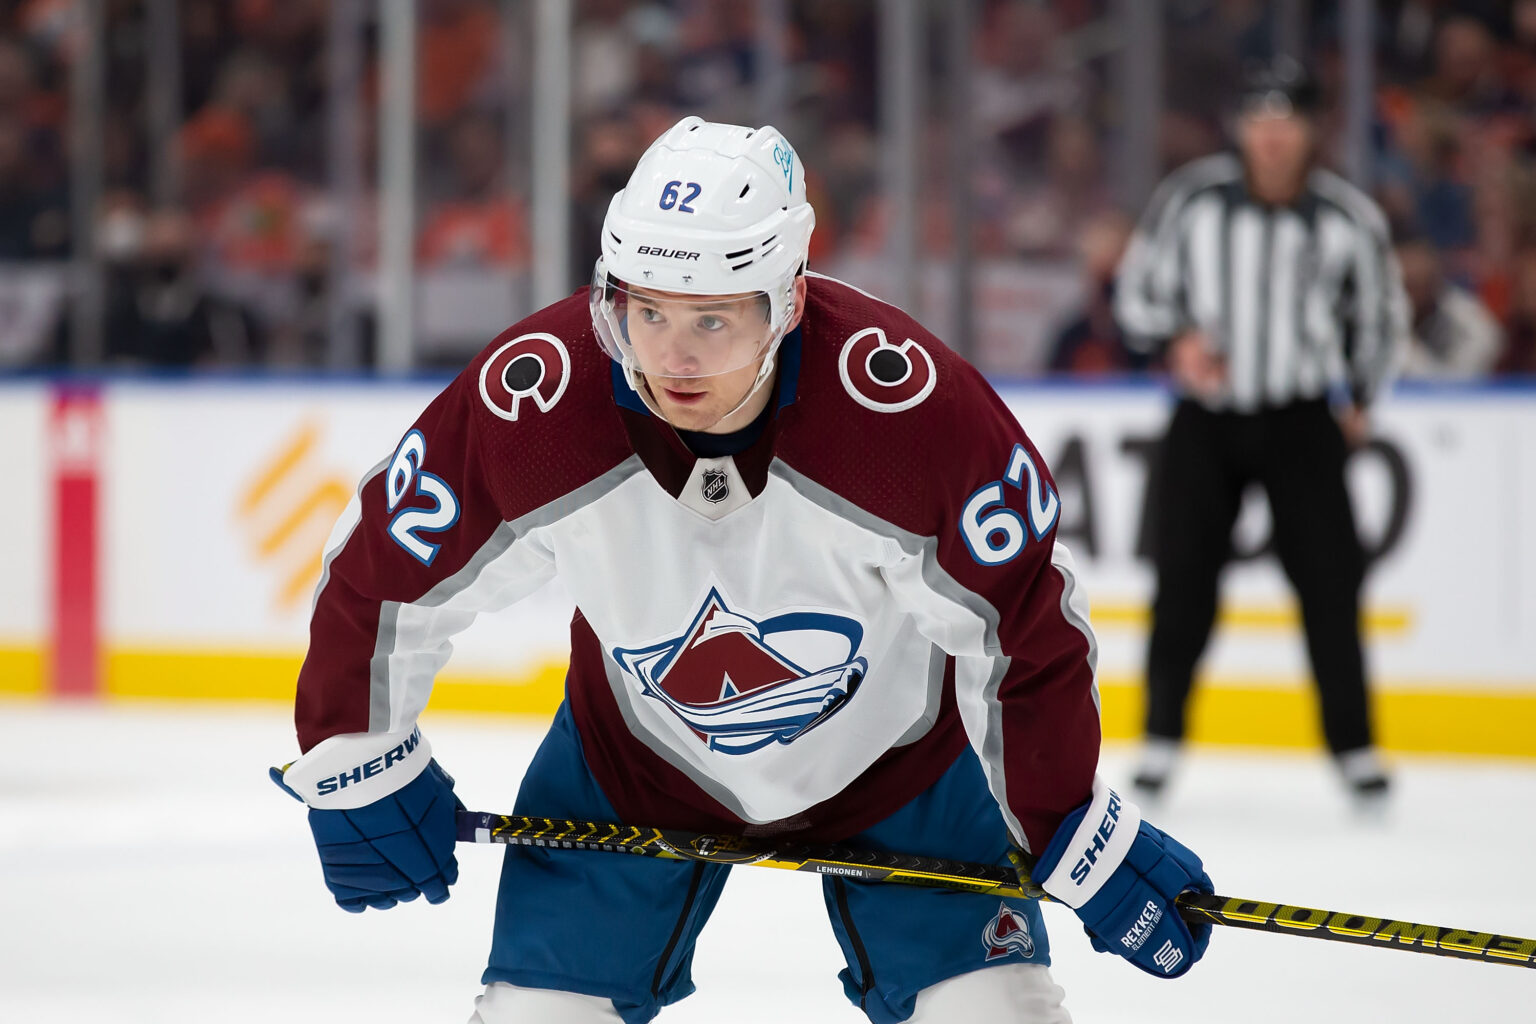 Avalanche’s Lehkonen Getting Back Into Groove - The Hockey Writers ...